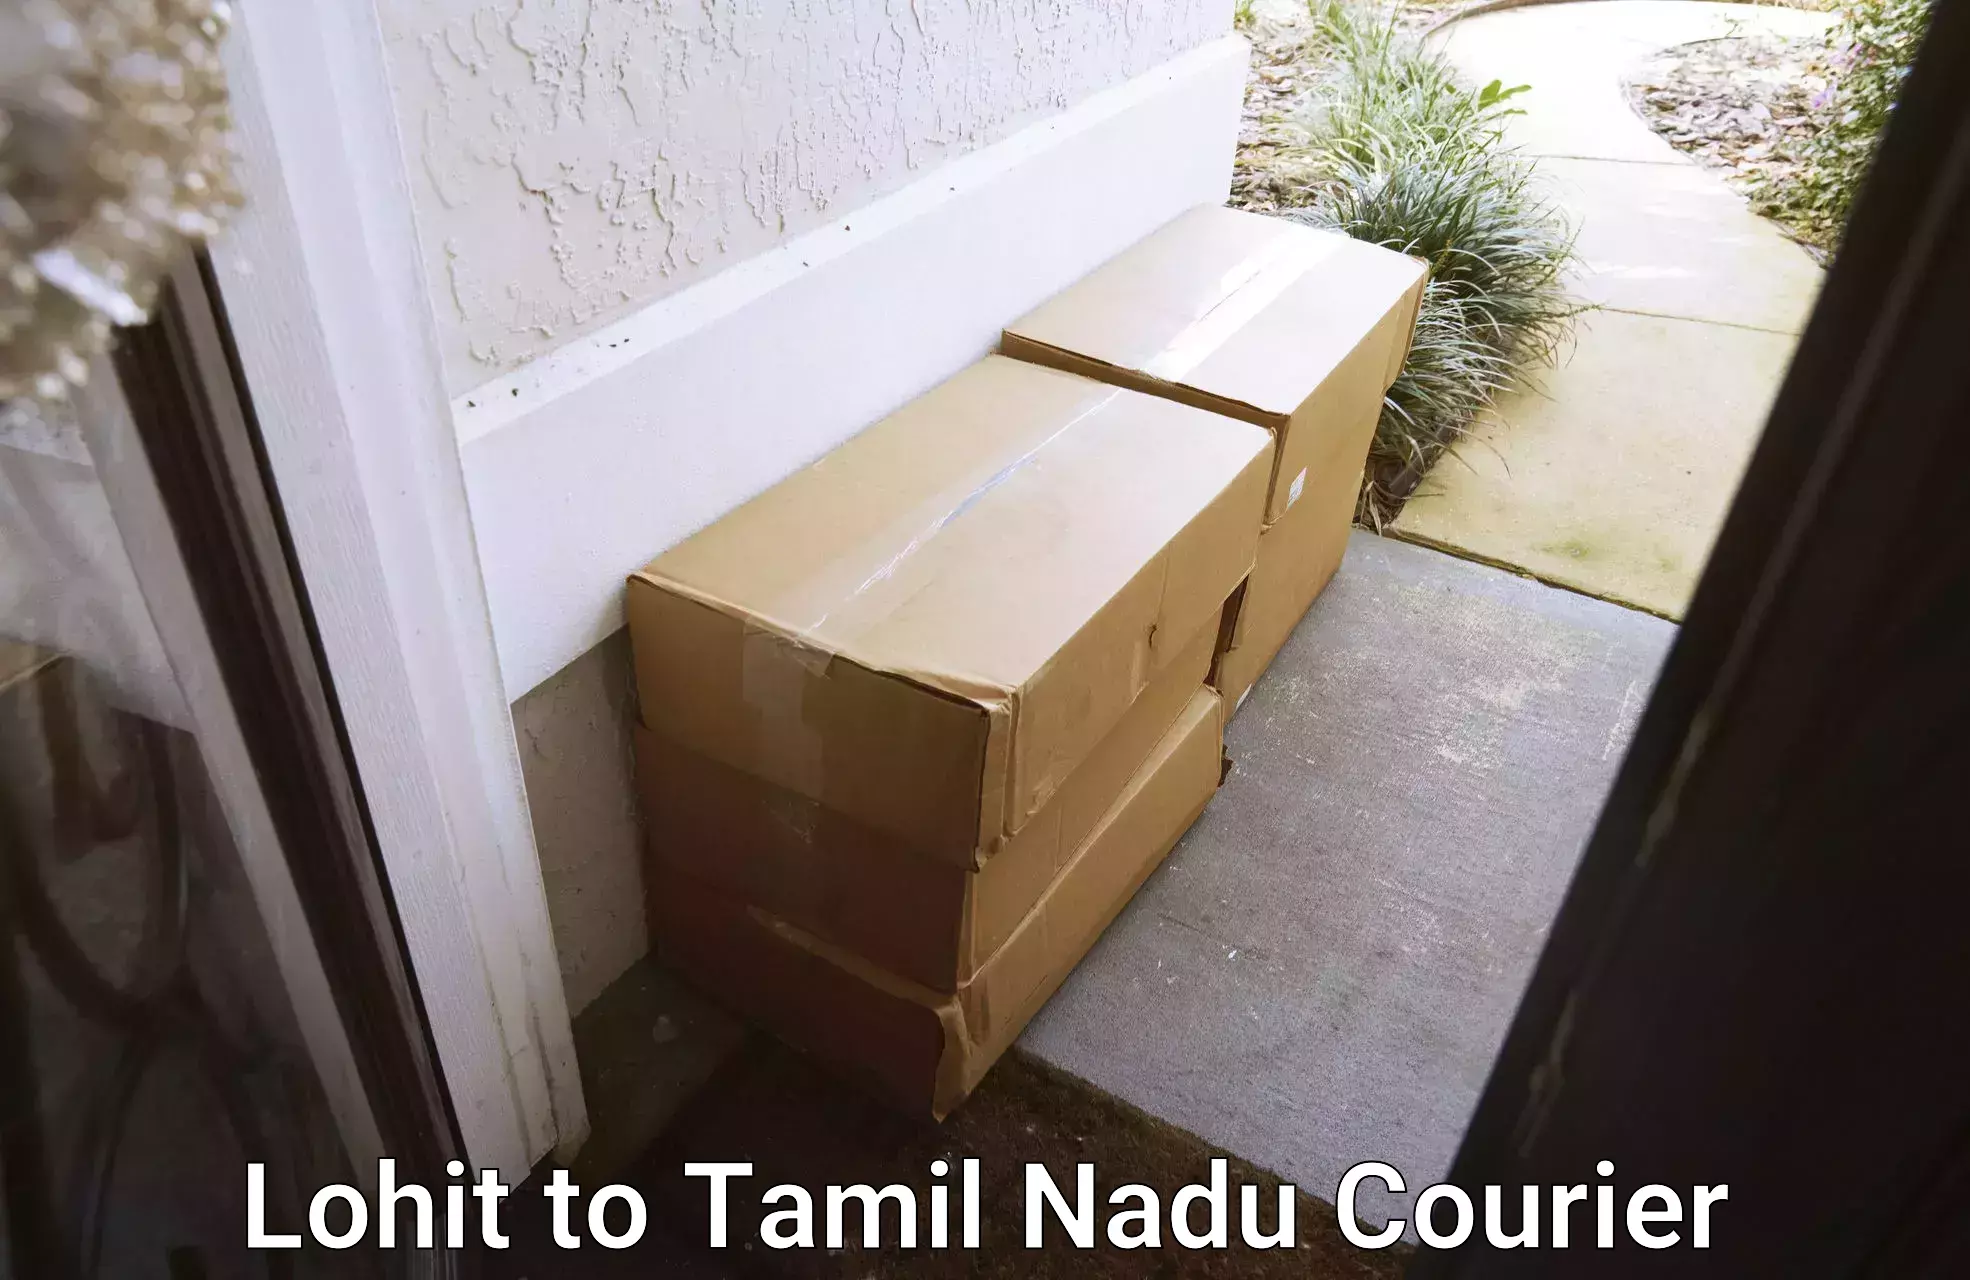 Global courier networks Lohit to Tamil Nadu